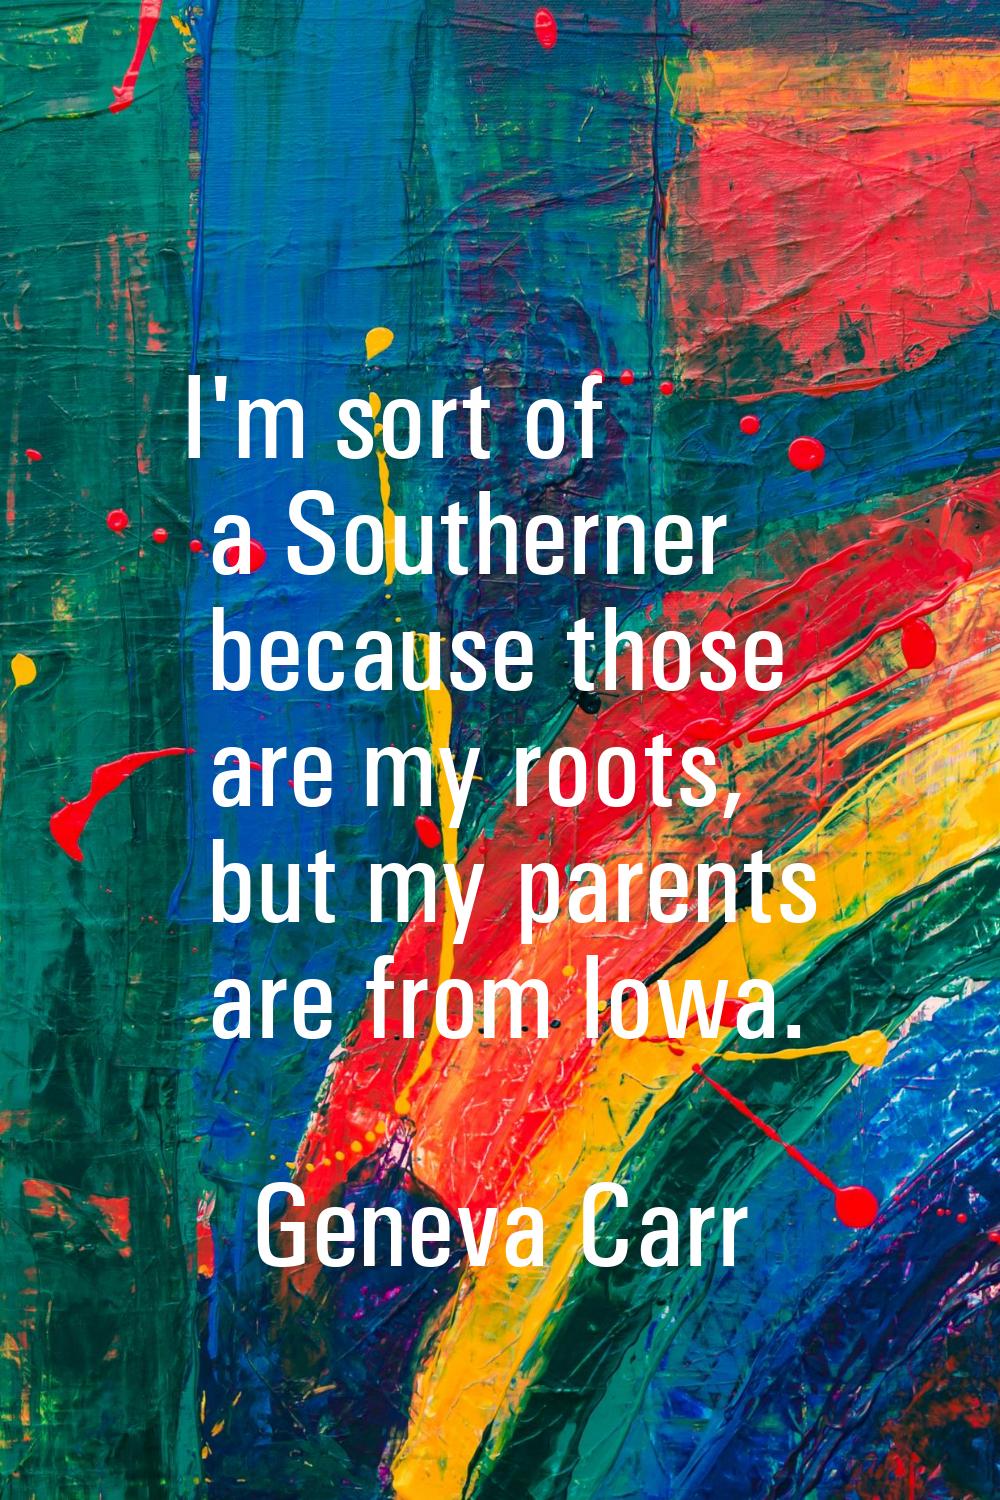 I'm sort of a Southerner because those are my roots, but my parents are from Iowa.